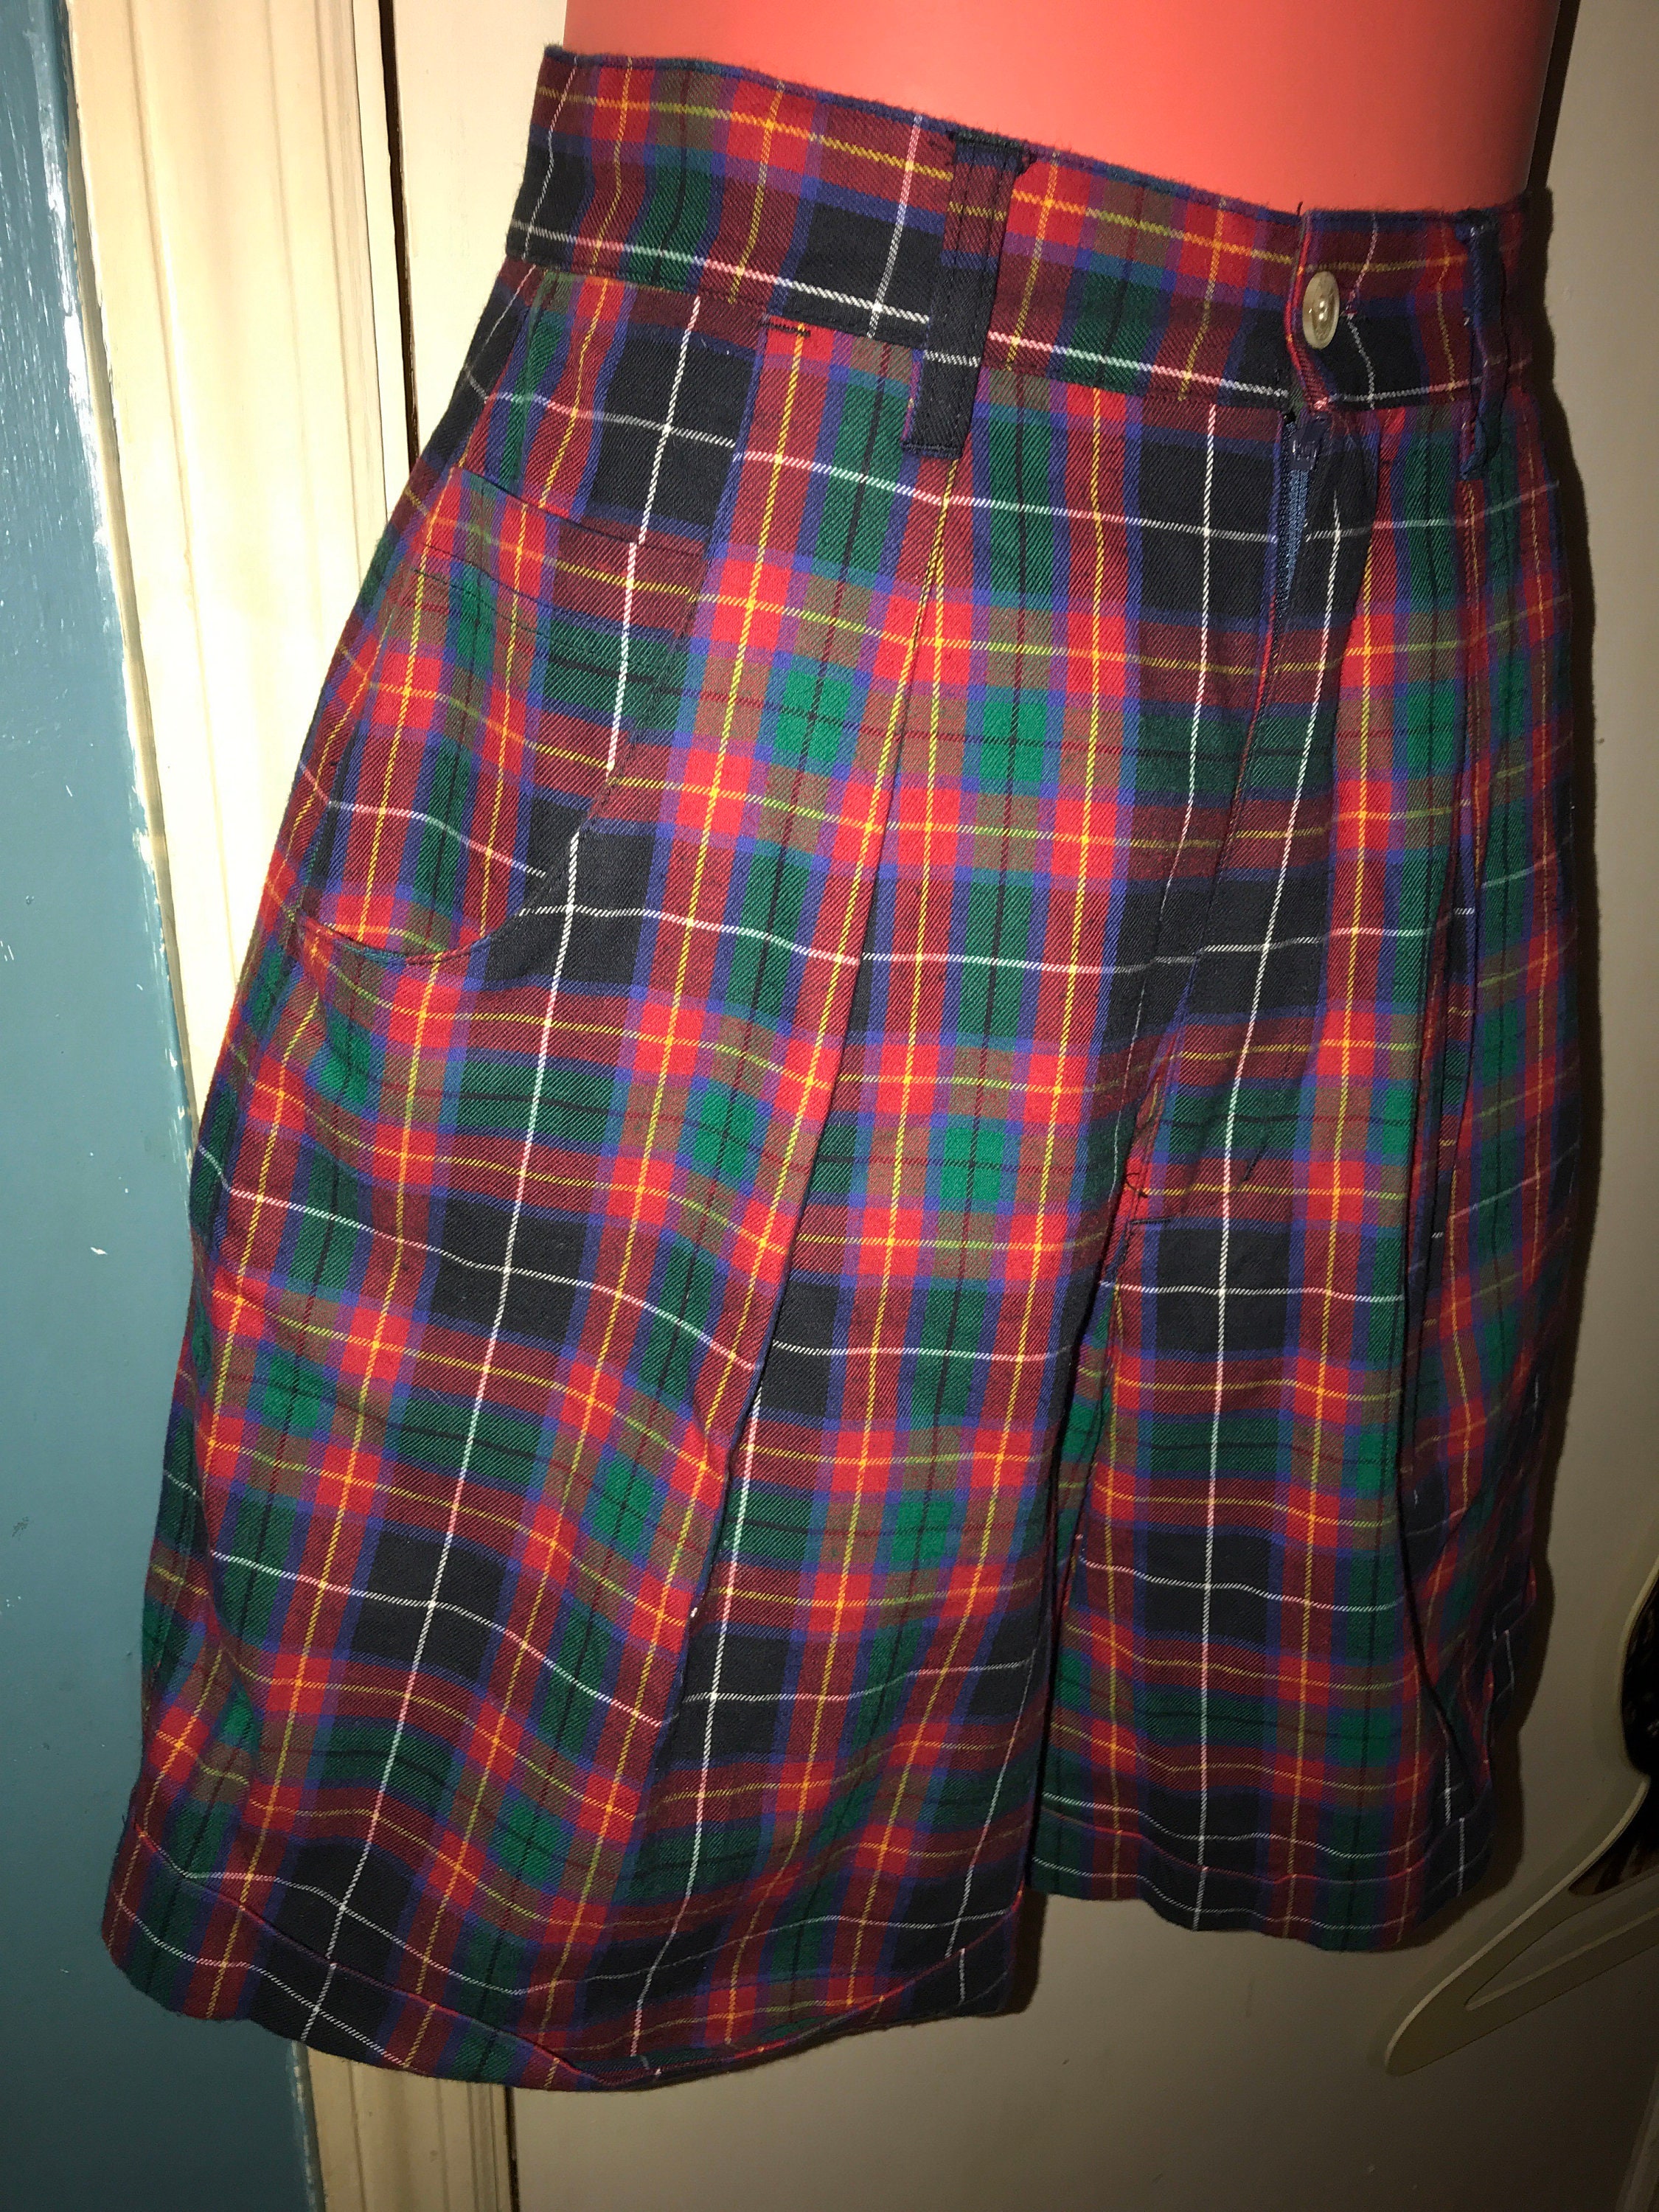 Vintage Red Plaid Shorts. Size 6